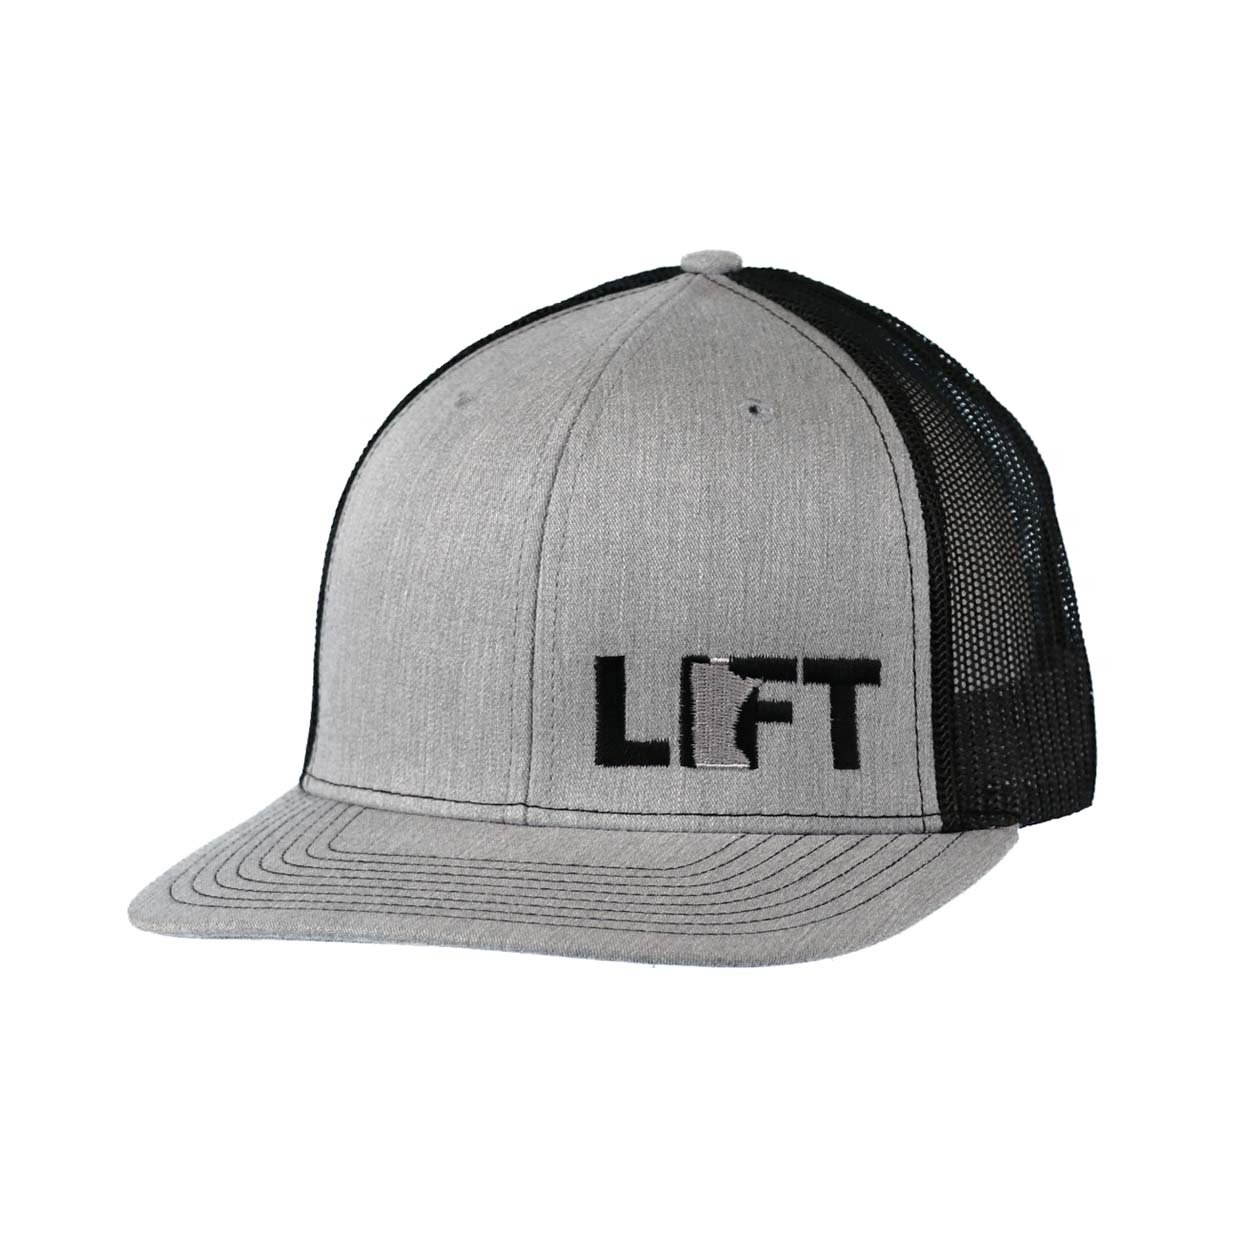 Lift Minnesota Night Out Embroidered Snapback Trucker Hat Heather Gray/Black